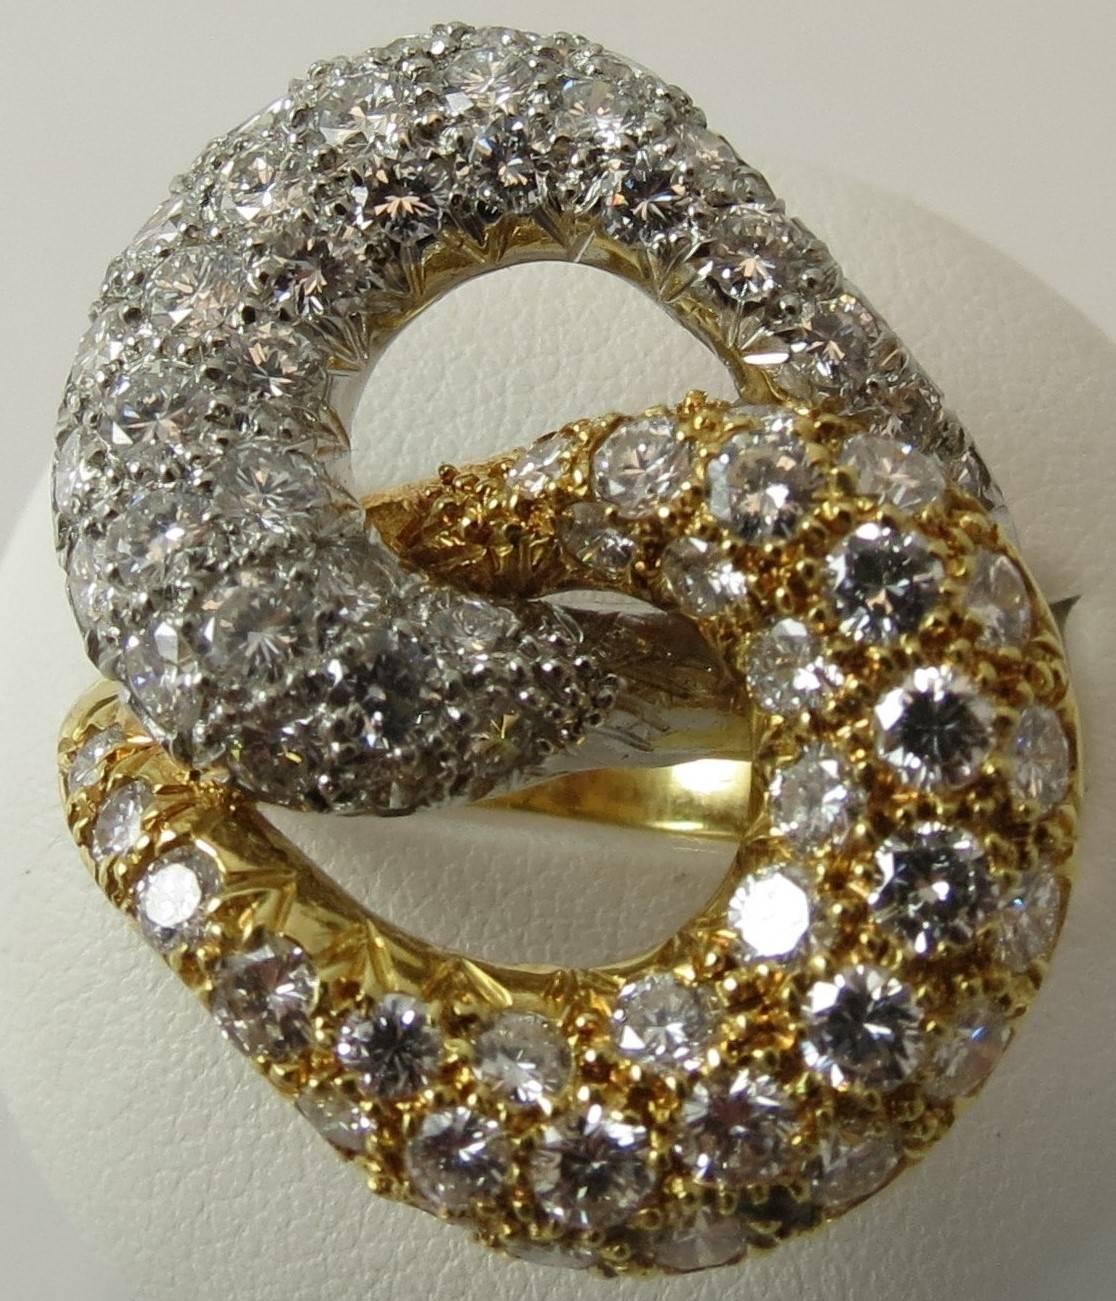 Montreaux platinum and 18K yellow gold double swirl pave diamond ring set with 68 round diamonds weighing 4.70cts, DE color and VVS clarity.
Finger size 6
May be sized